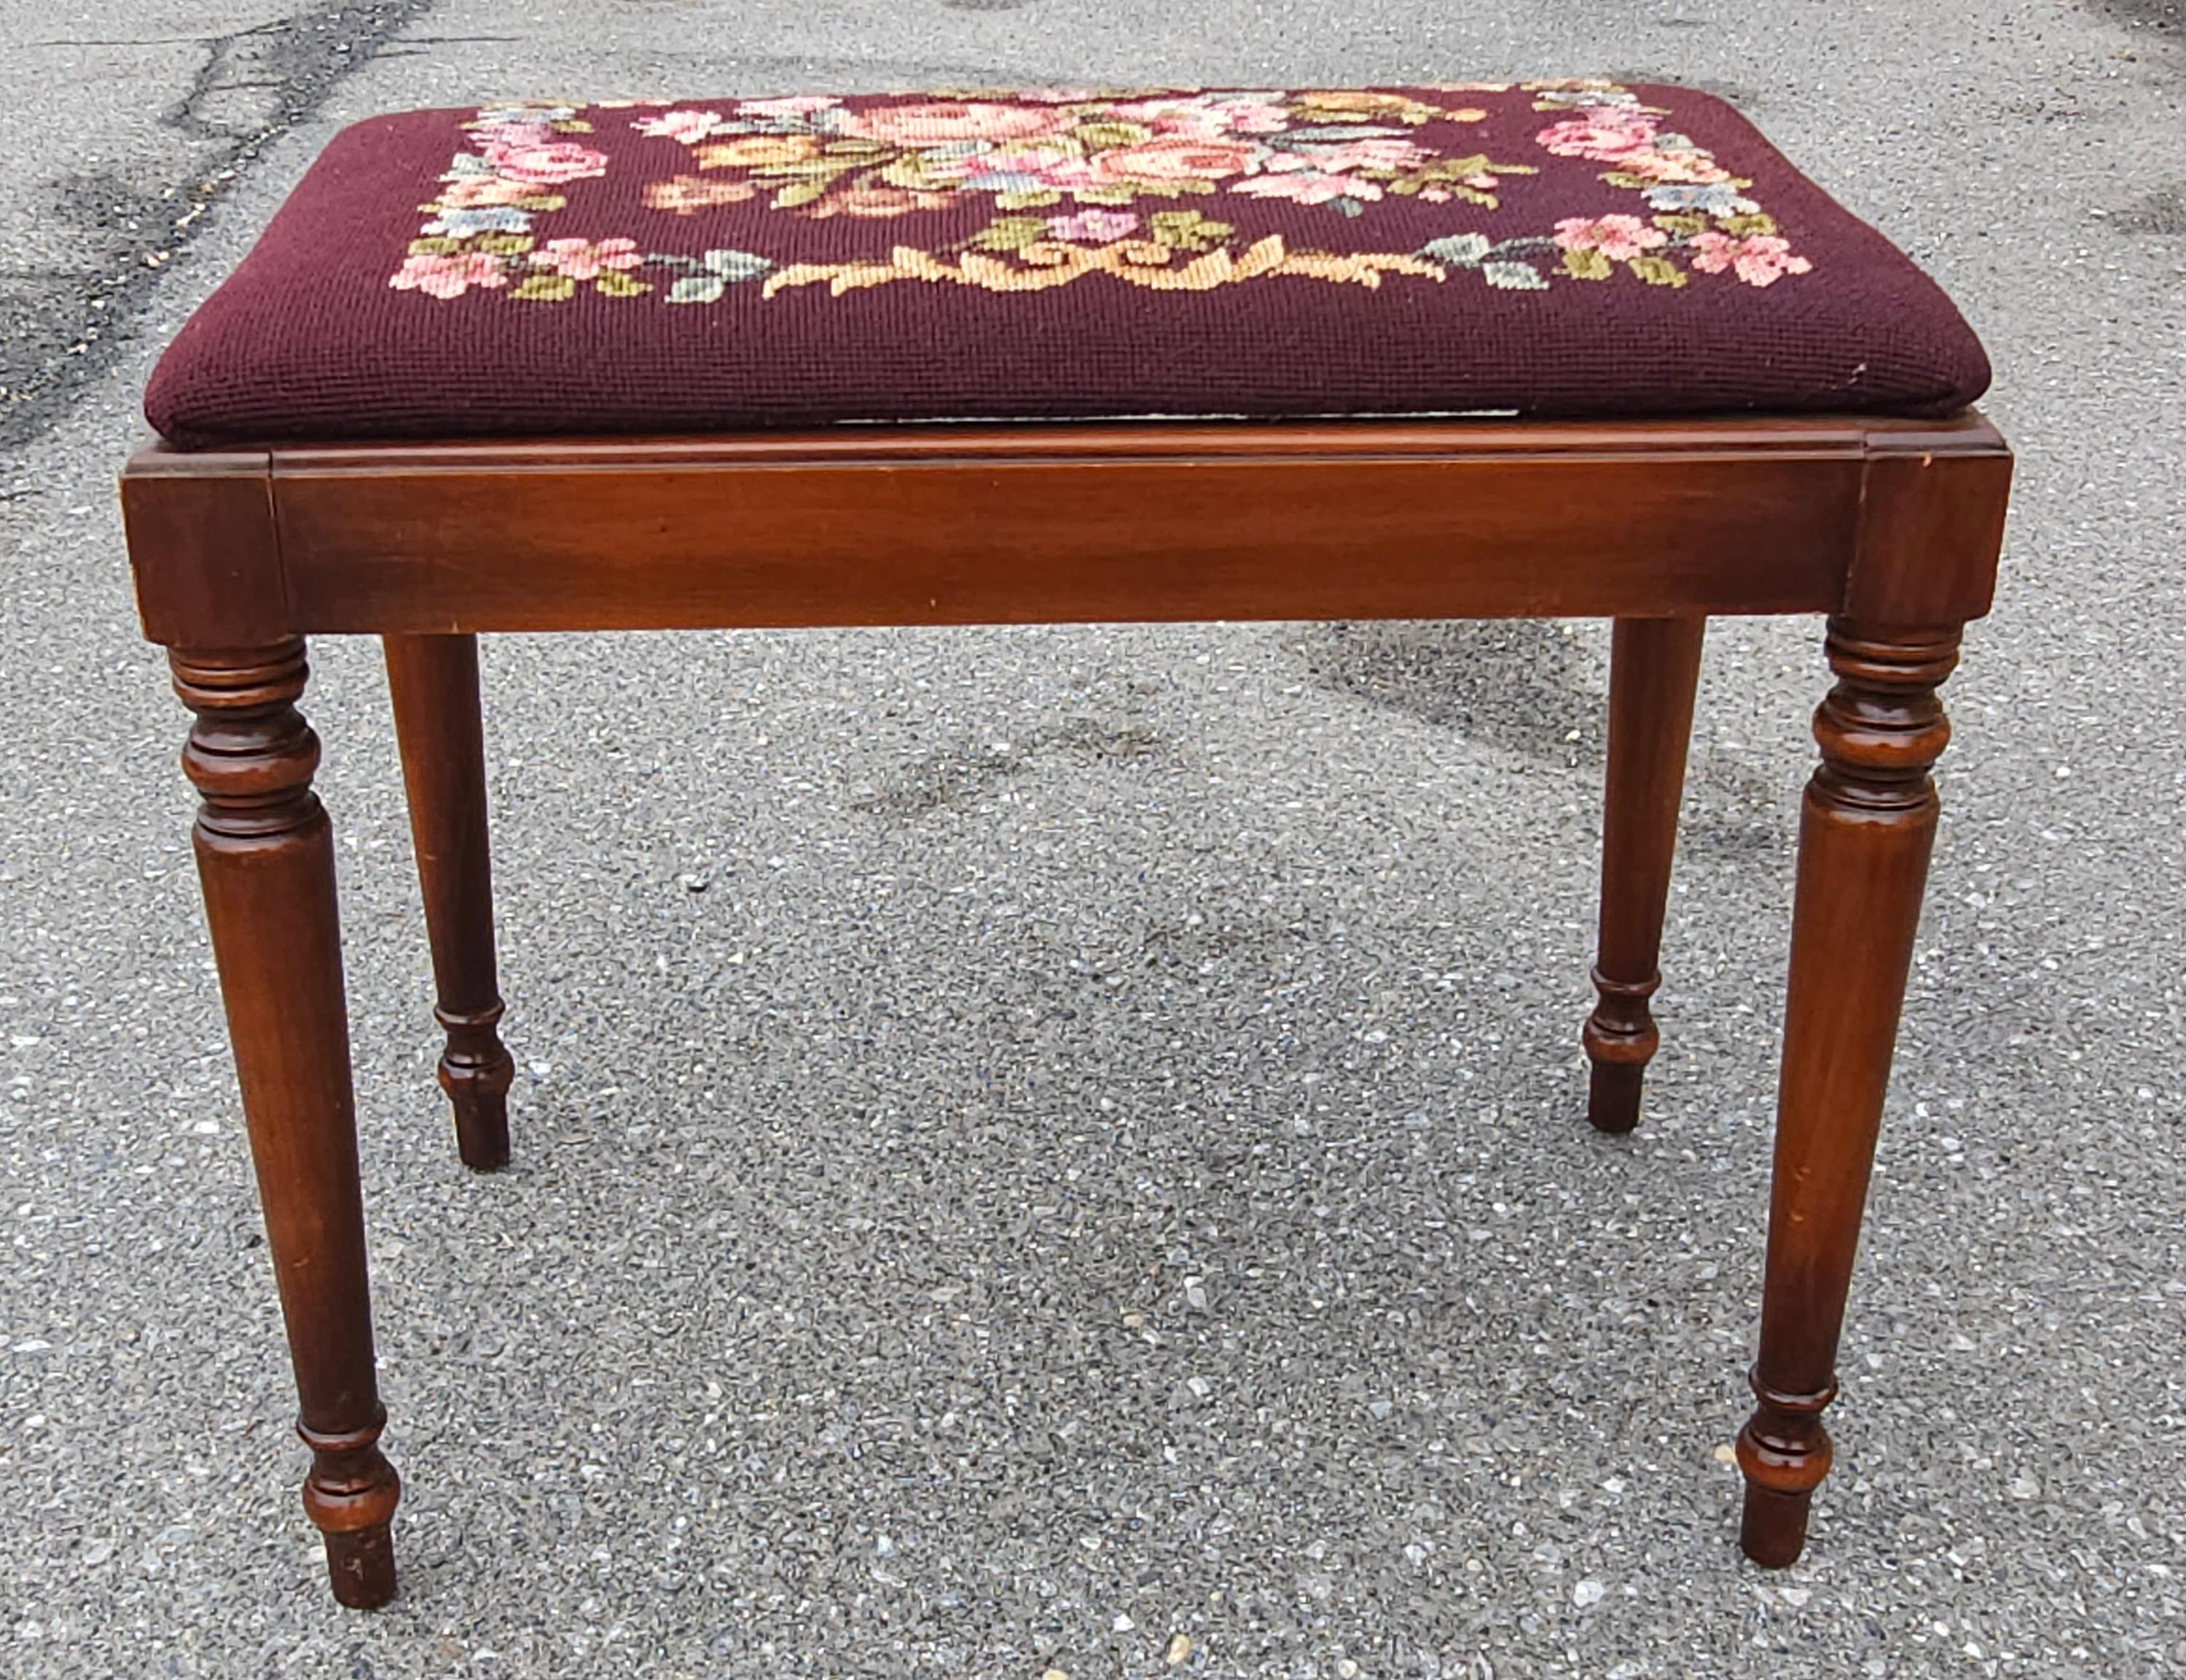 Mid 20th Century Kindel Furniture Oxford Cherry & Needlepoint Upholstered Bench For Sale 1